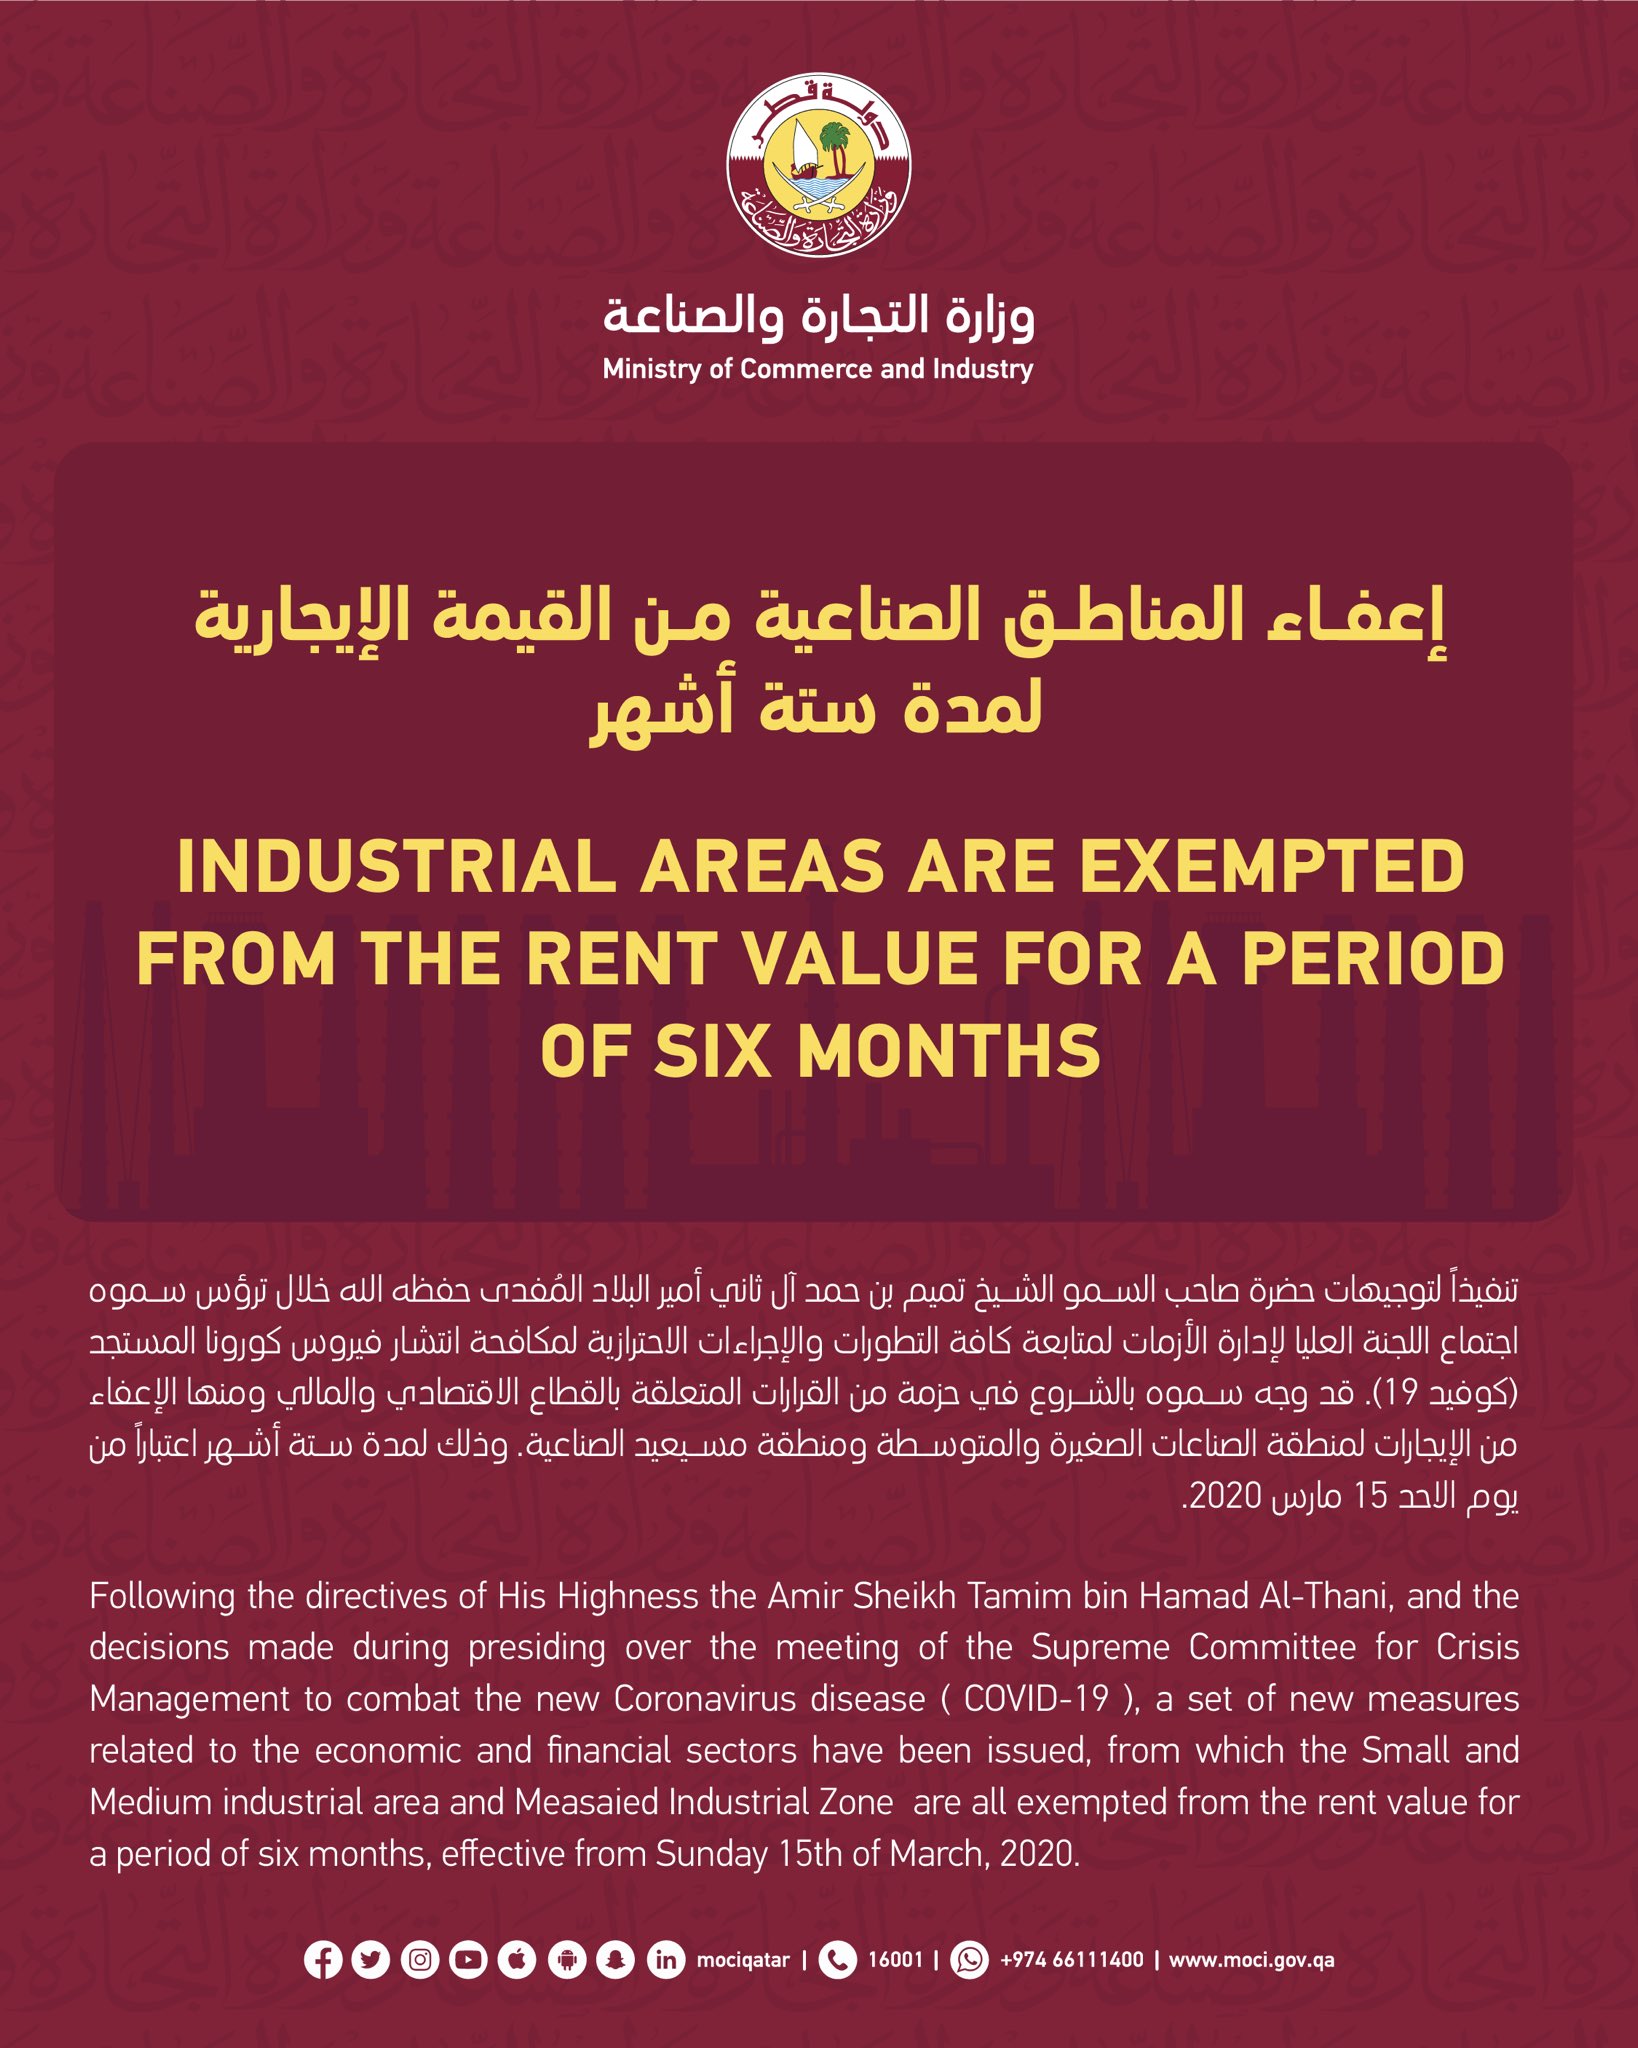 Industrial areas are exempted from the rent value for a period of six months